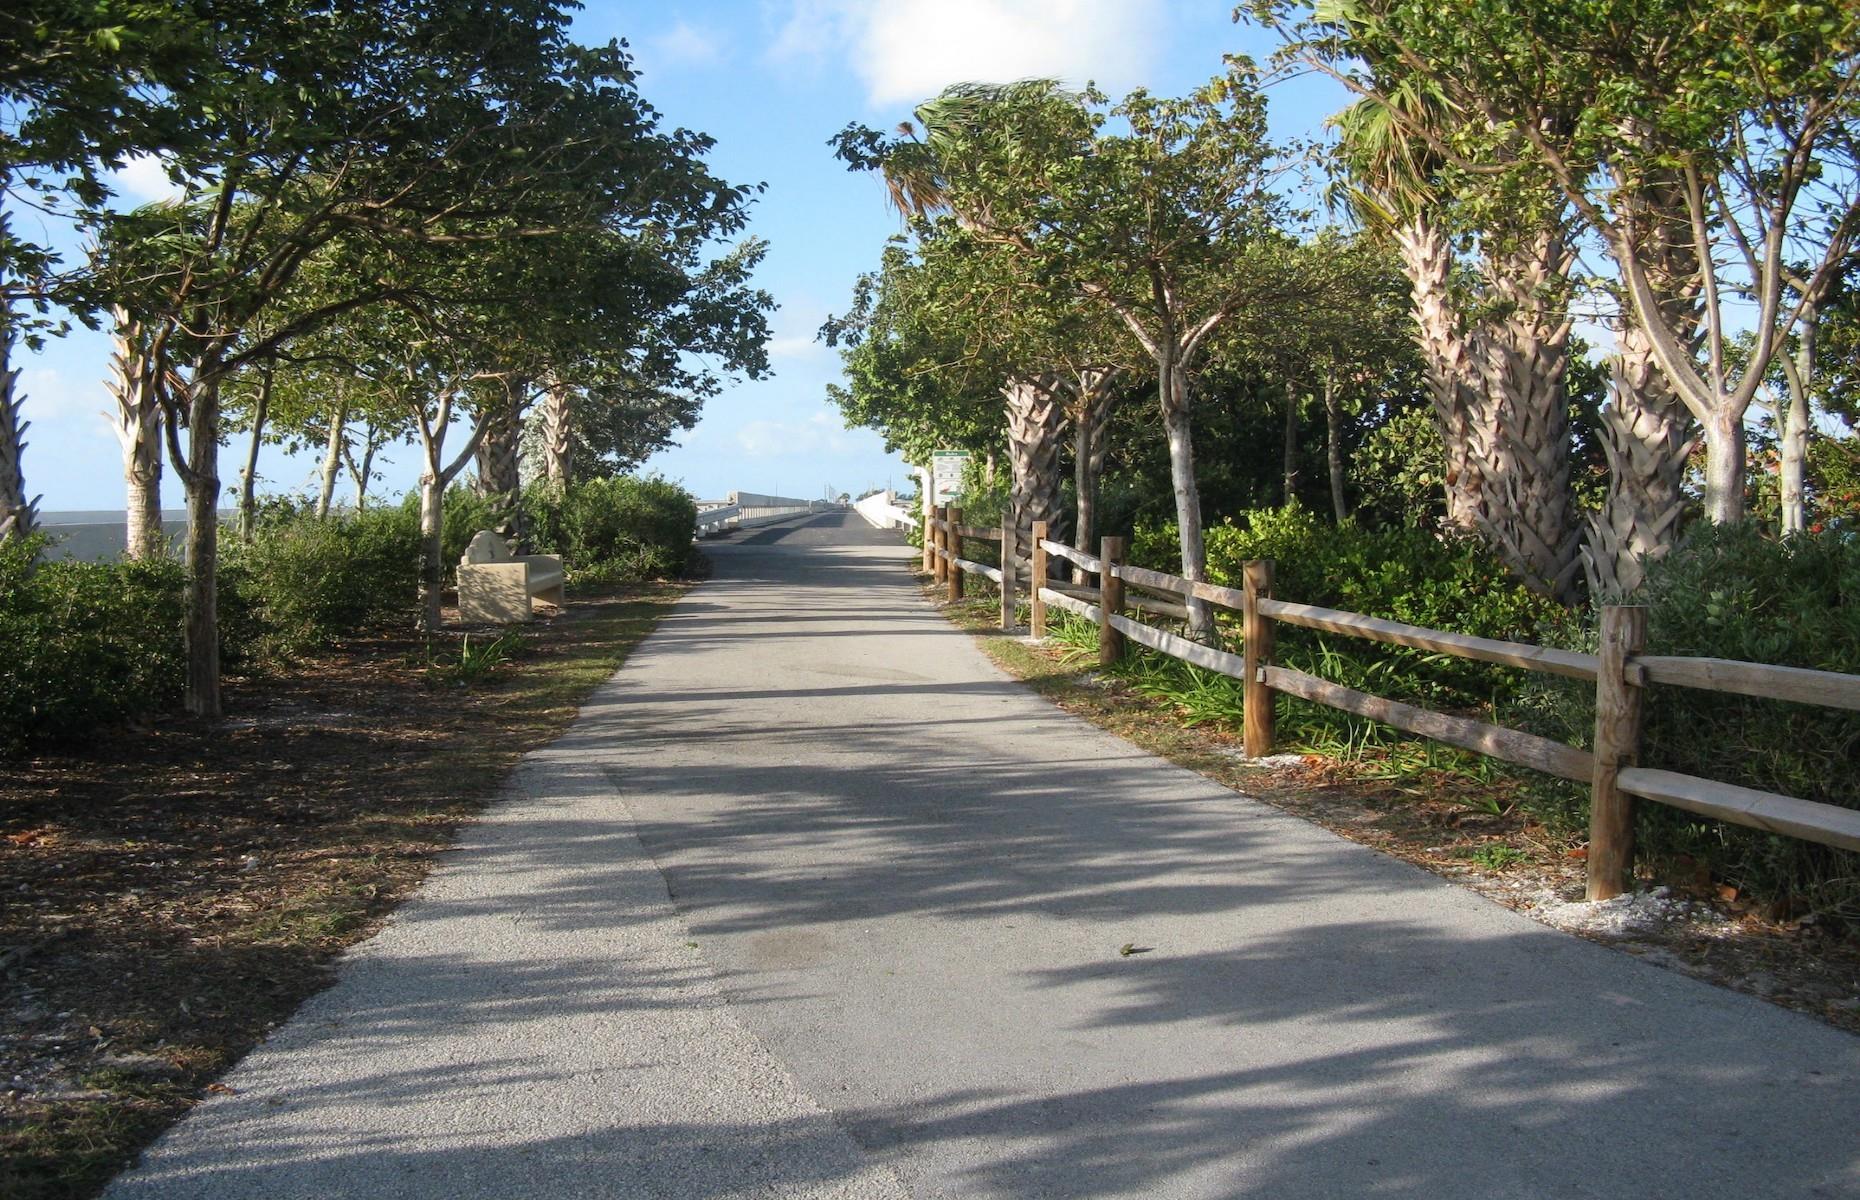 <p>The Florida Keys Overseas Heritage Trail is a series of multi-use paths and trails that link together all the towns in the <a href="https://www.loveexploring.com/guides/73827/explore-the-florida-keys-where-to-stay-what-to-eat-the-top-things-to-do">Florida Keys</a>. They follow the route of a former railroad line originally built by American industrialist and founder of the Florida East Coast Railway, Henry Flagler, in 1912. A ride along the paved cycle trail offers the chance to weave through the colorful Keys communities and over Flagler’s historic railroad bridges.</p>